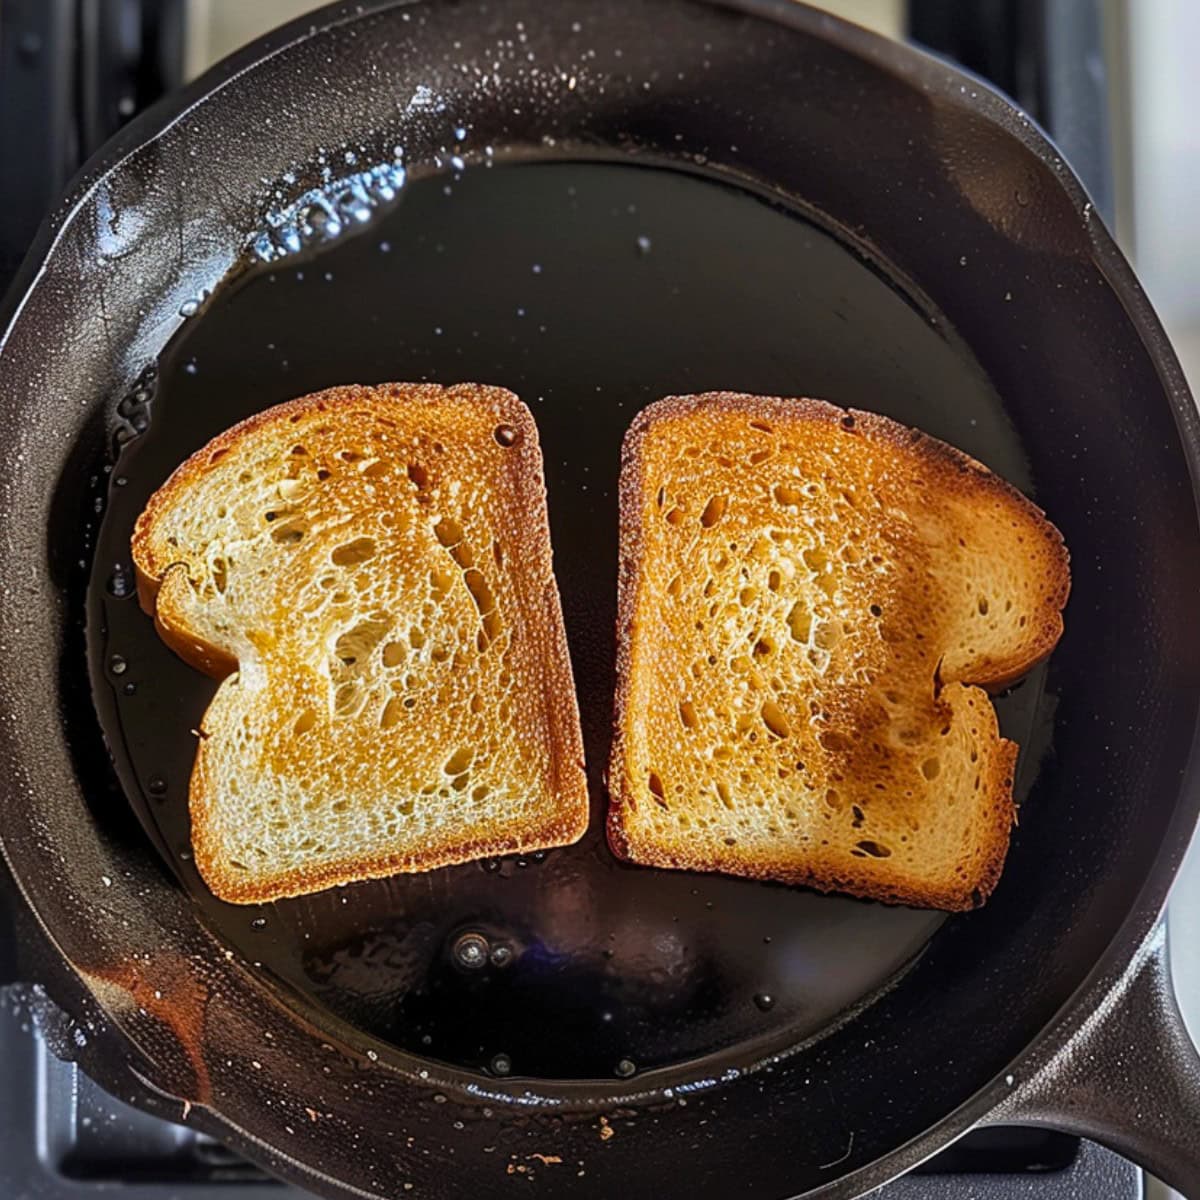 Top View of Two Slices of Bread Toasting in a Cast Iron Pan